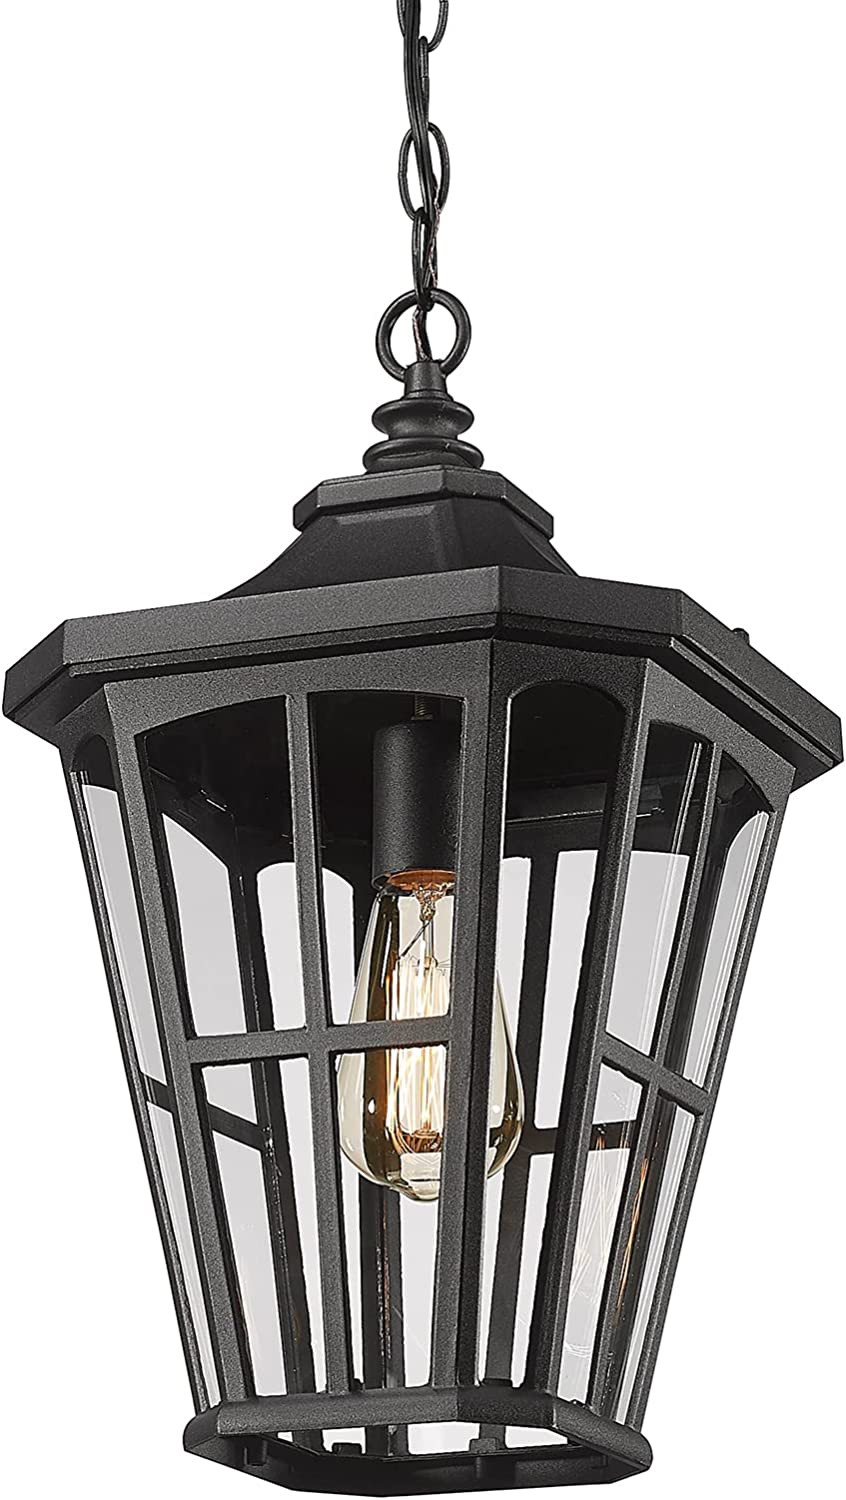 Farmhouse outdoor hanging light black exterior pendant lamp with glass shade